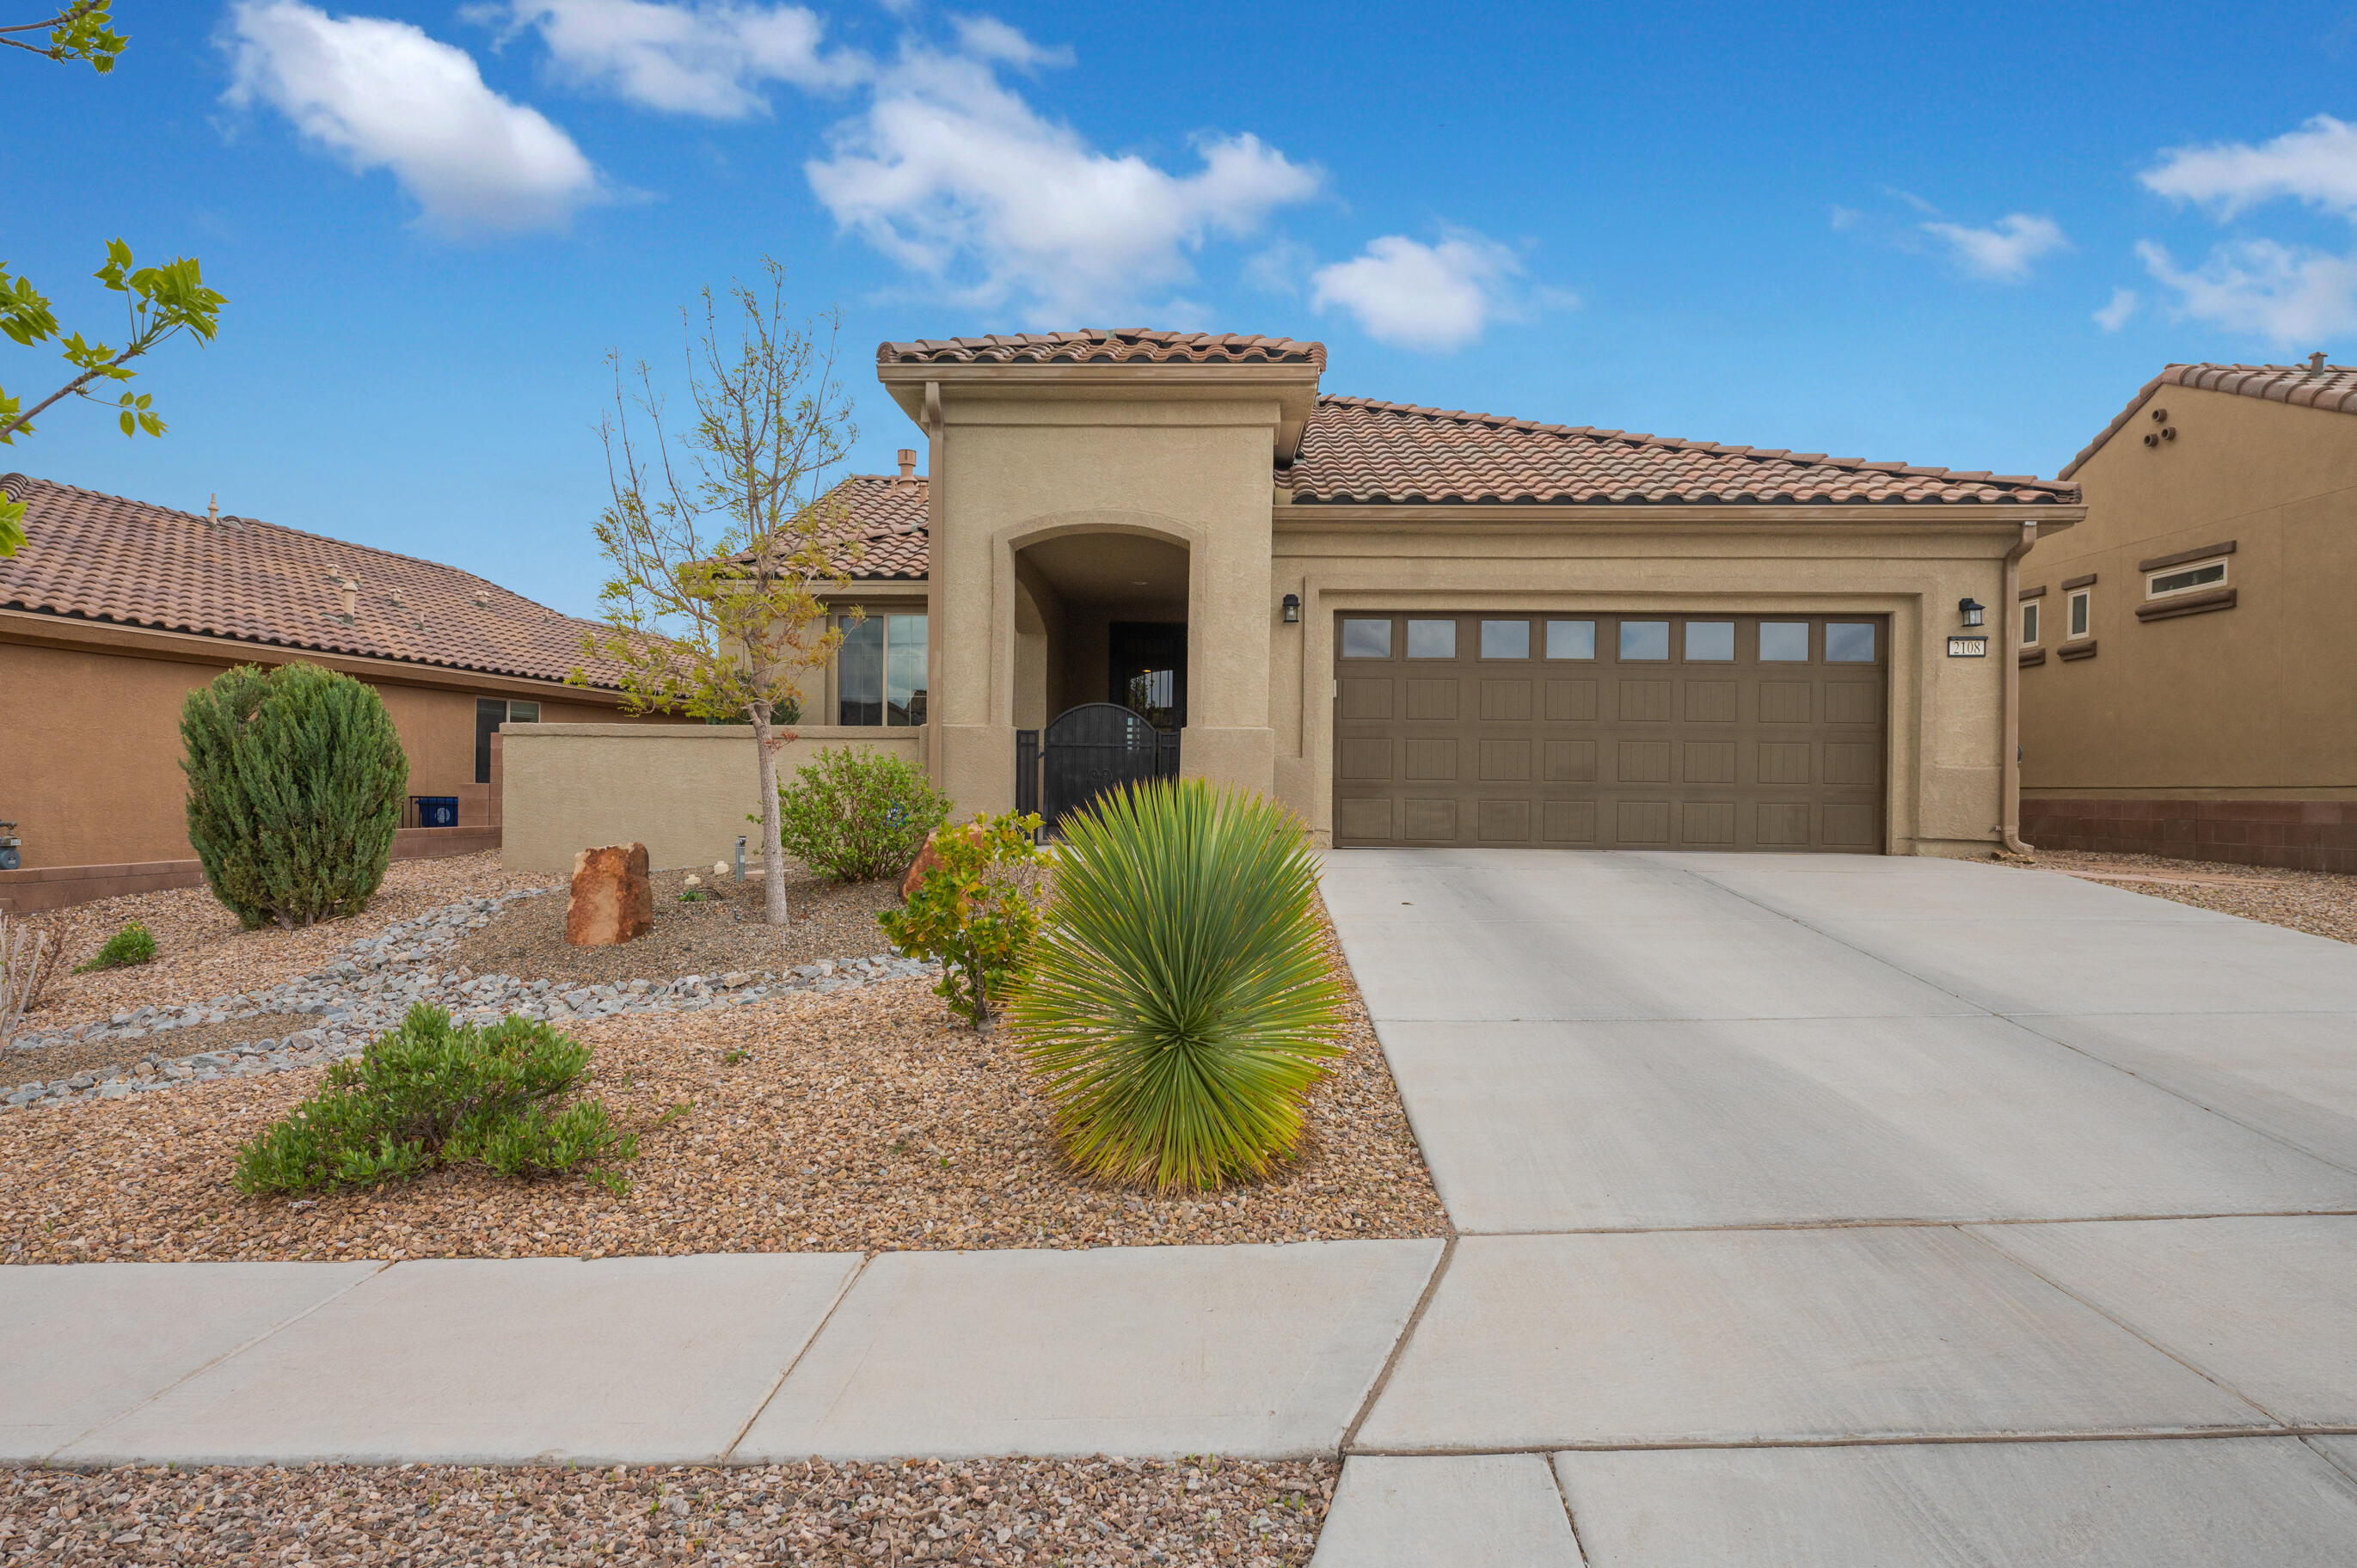 2108 Willow Canyon Trail NW, Albuquerque, NM 87120